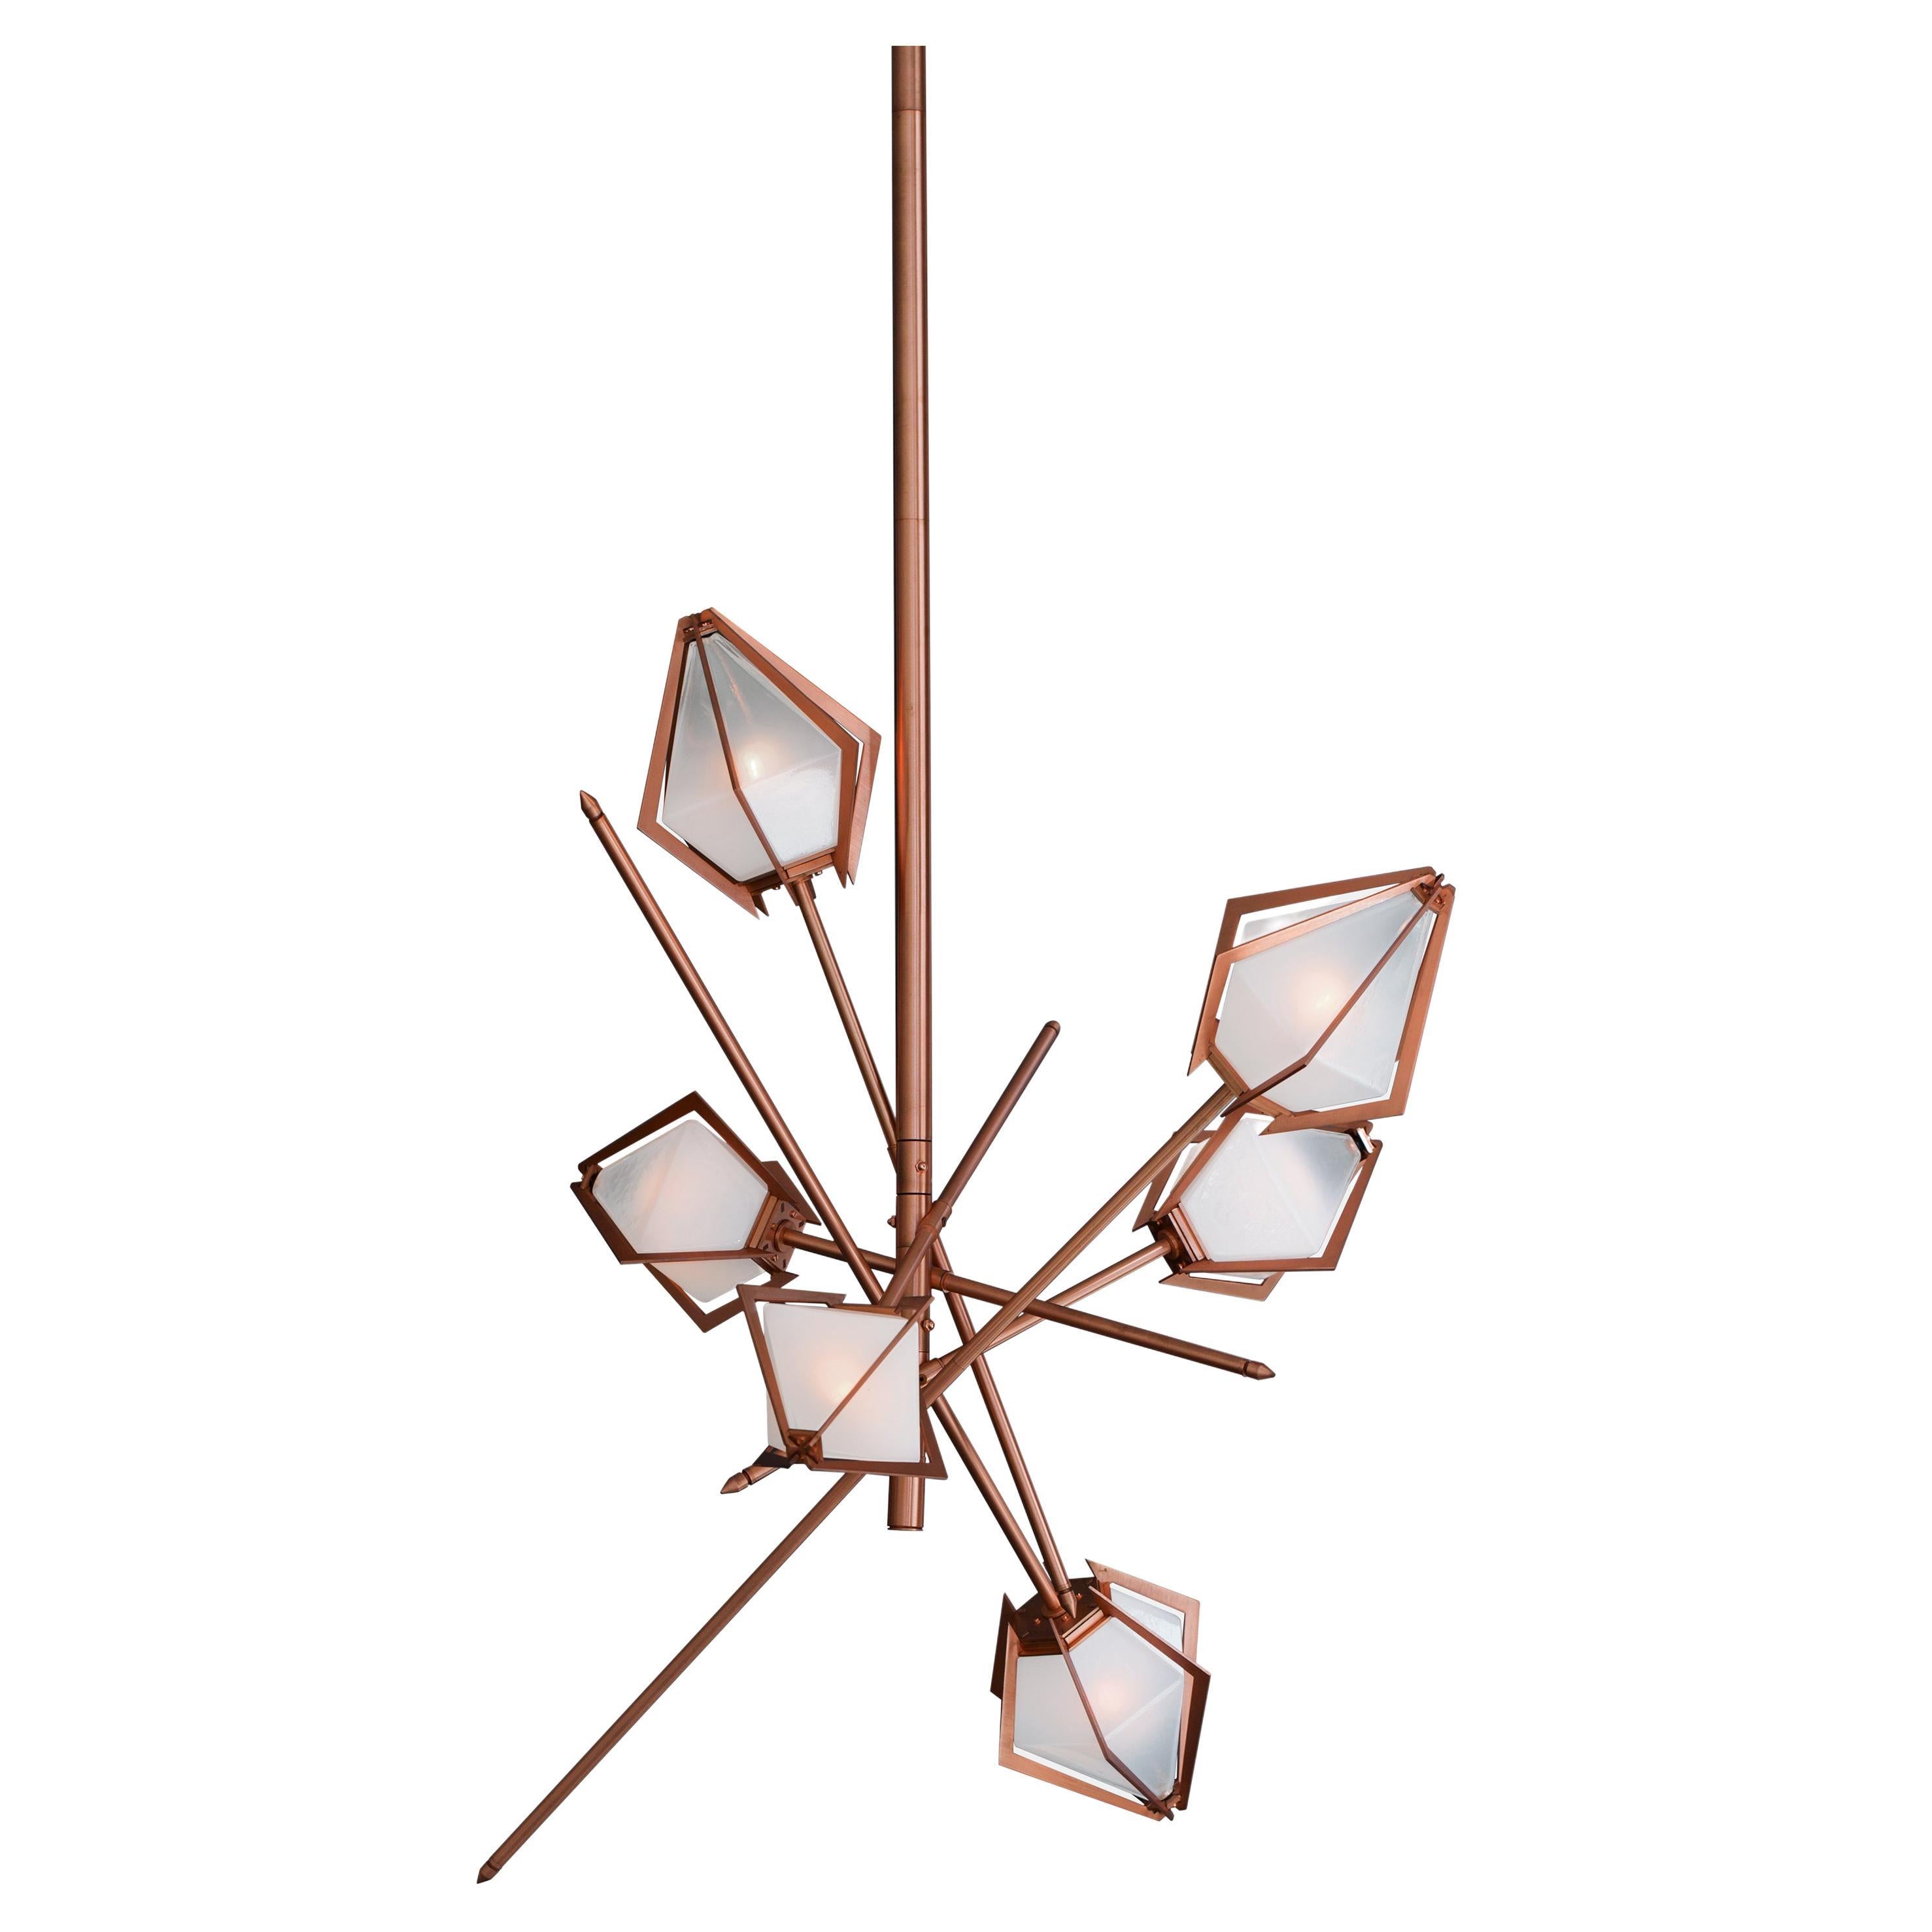 Harlow Small Chandelier in Satin Copper & Alabaster White Glass